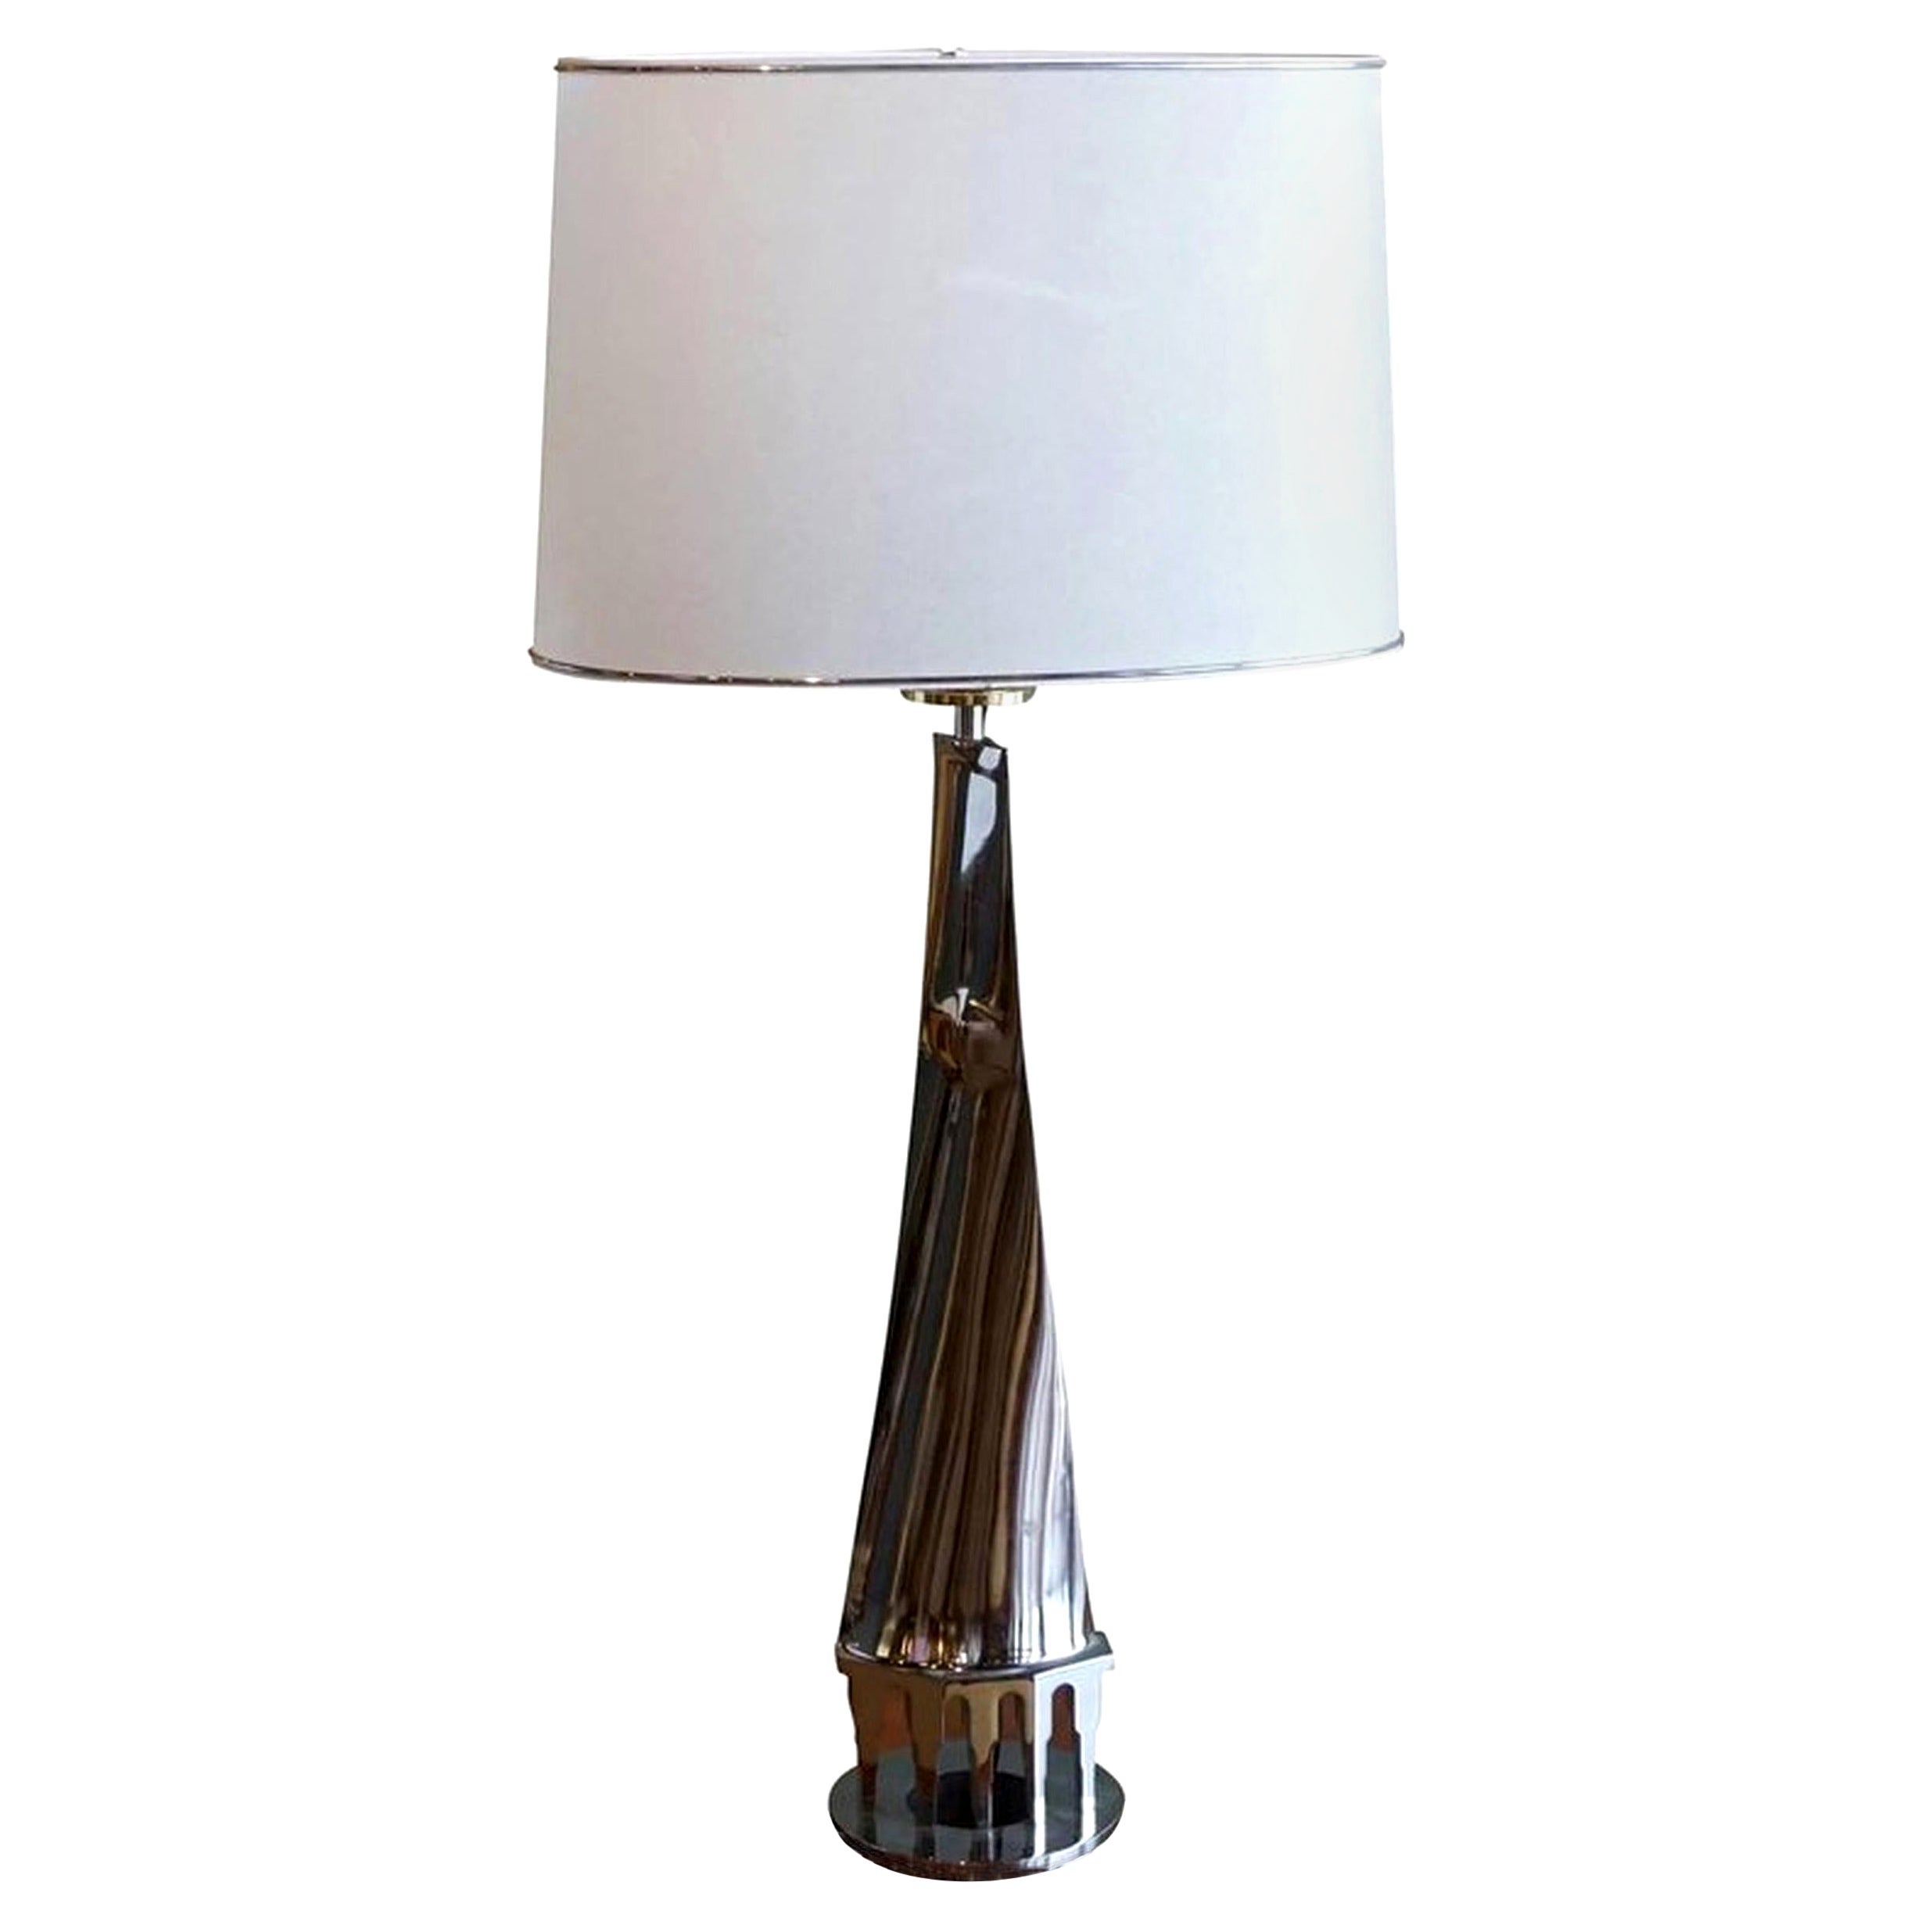 20th Century Silver Italian Florentine Chrome Table Lamp by Banci Firenze For Sale